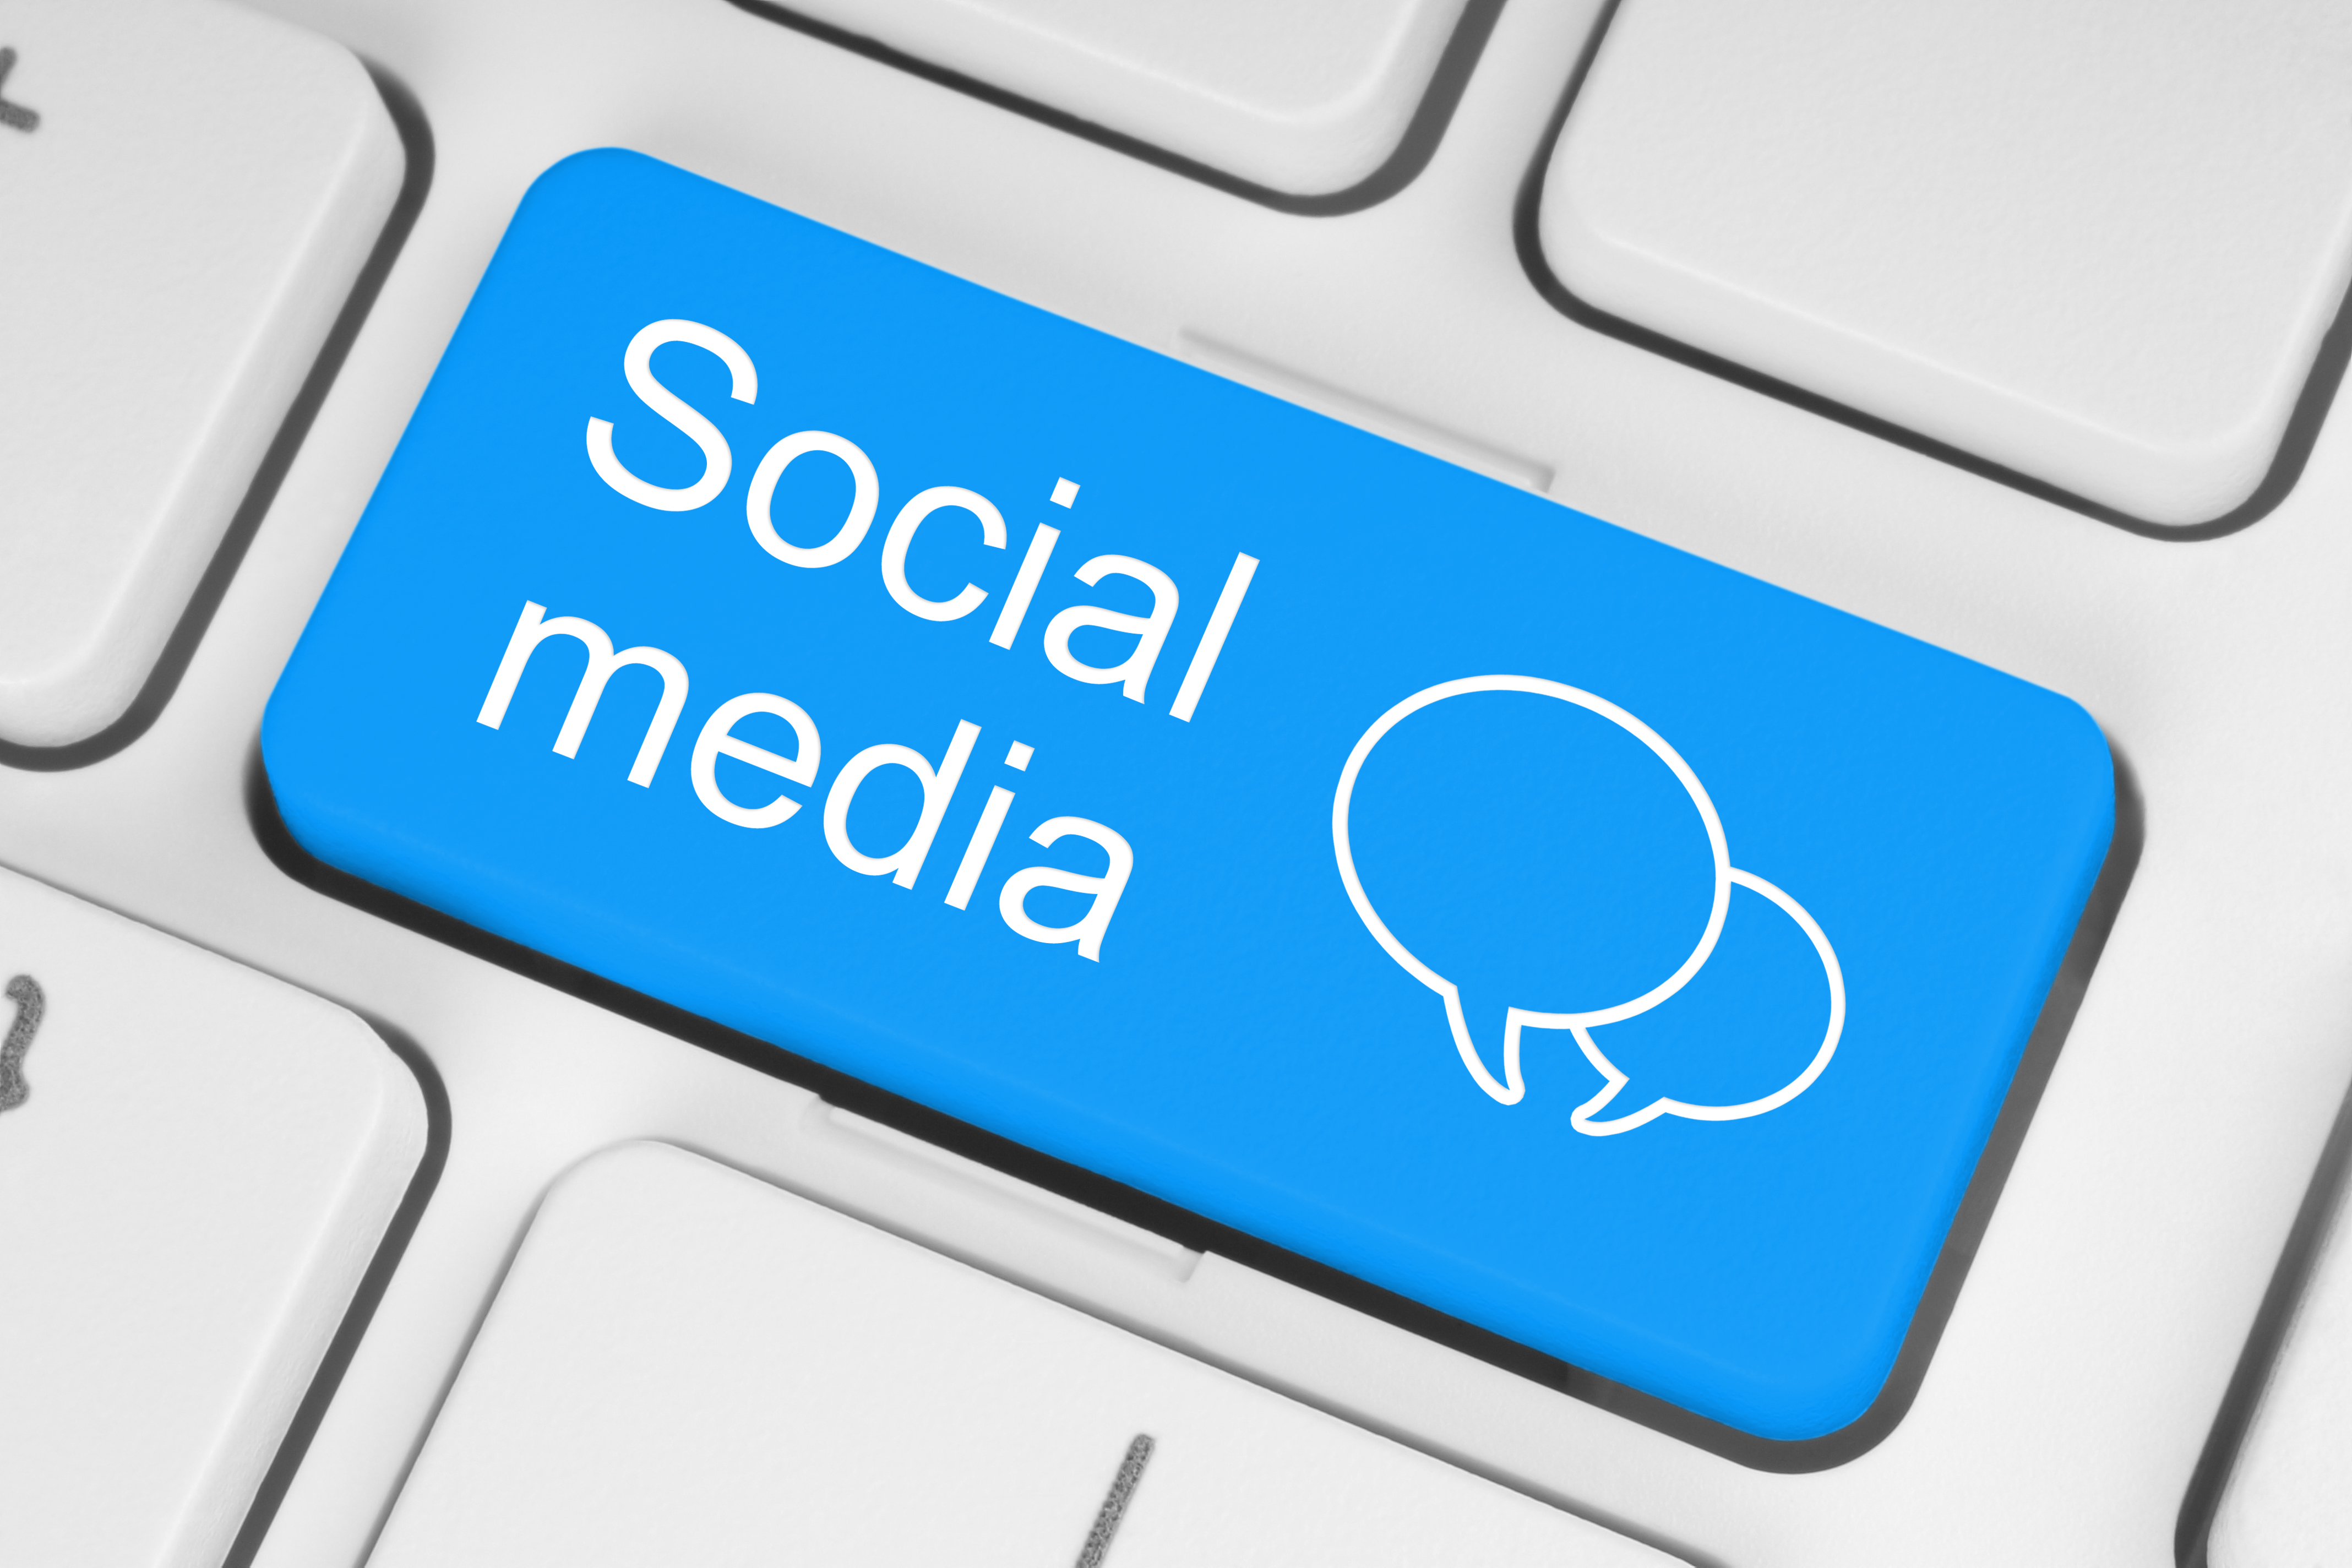 Fifty-eight percent of remodelers use social media sites such as Facebook, LinkedIn, Twitter, Pinterest, and Houzz to market clients. 